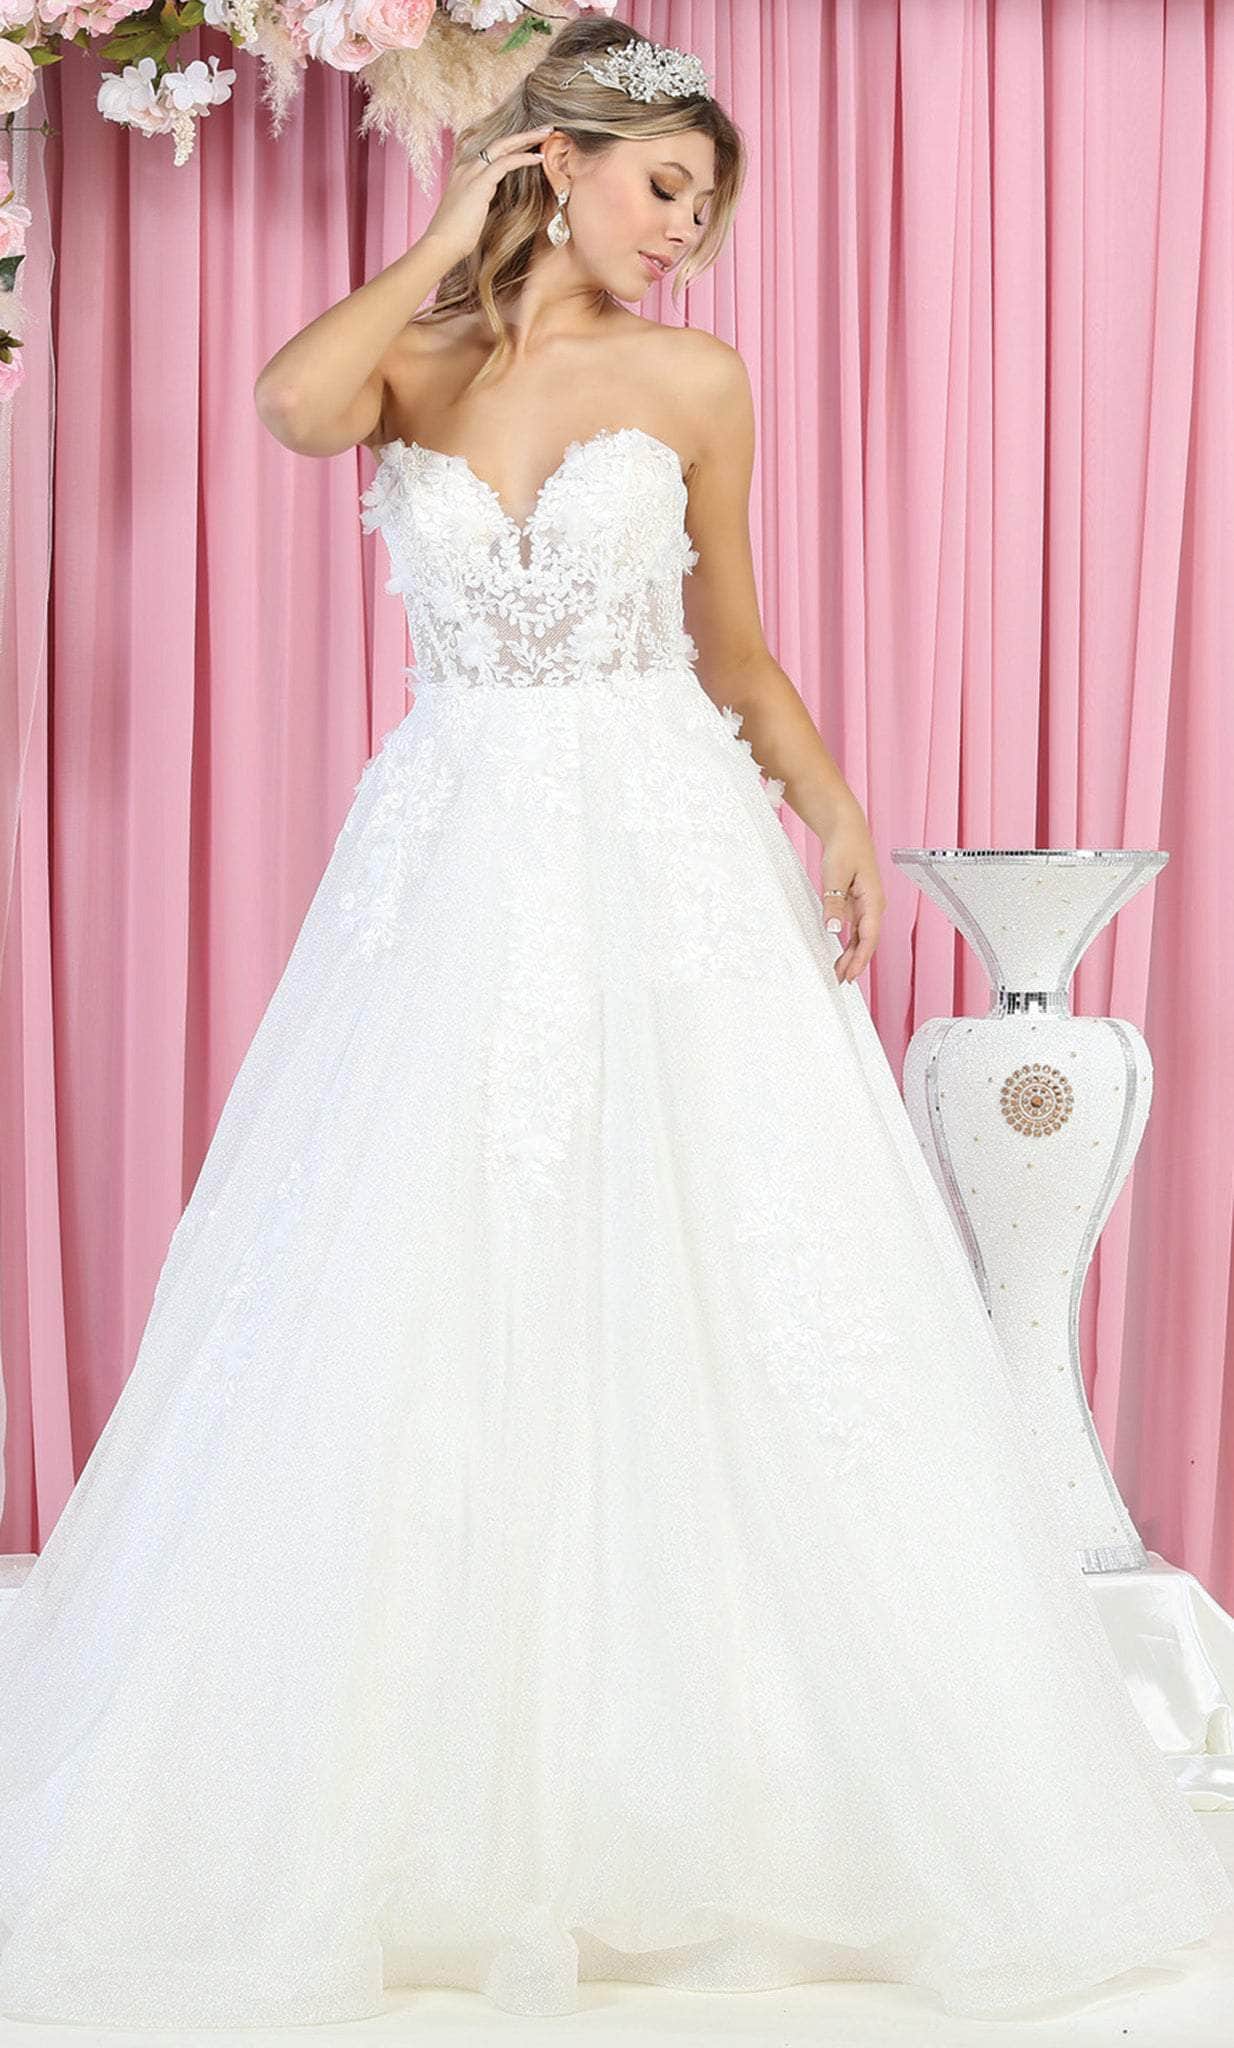 May Queen RQ7938 - Floral Strapless Bridal Dress
